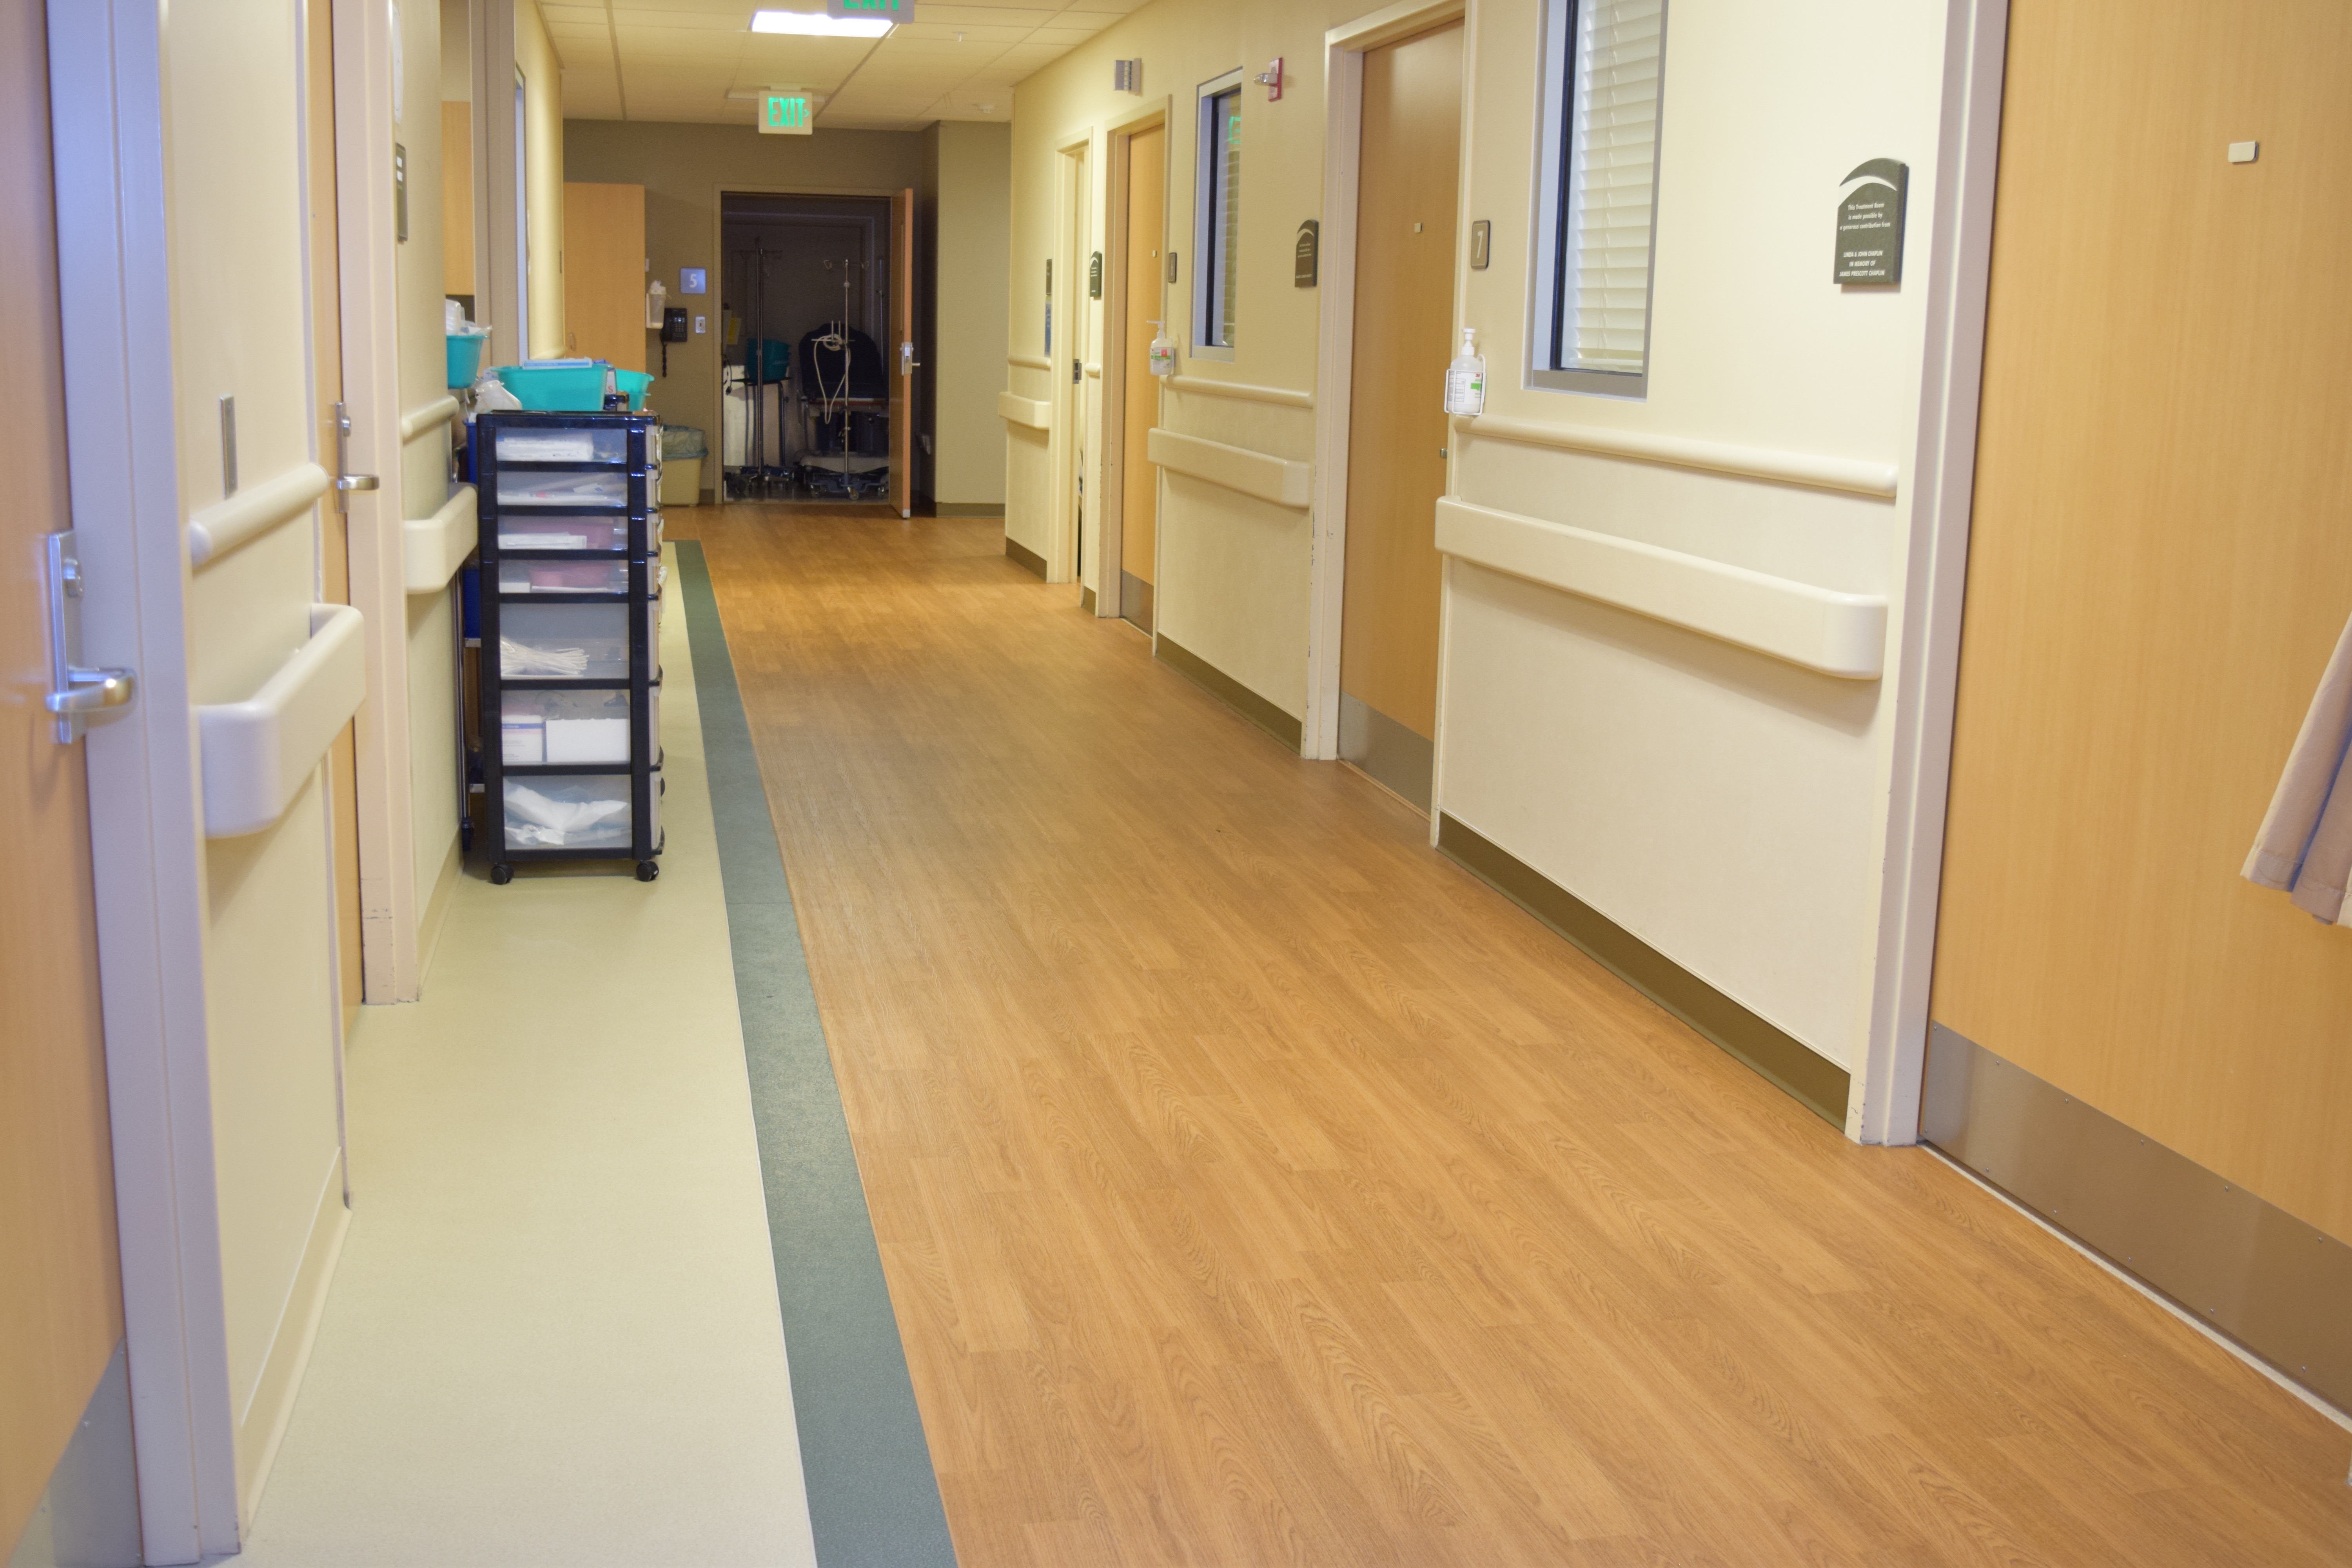 When is it Time to Go to the Emergency Department?